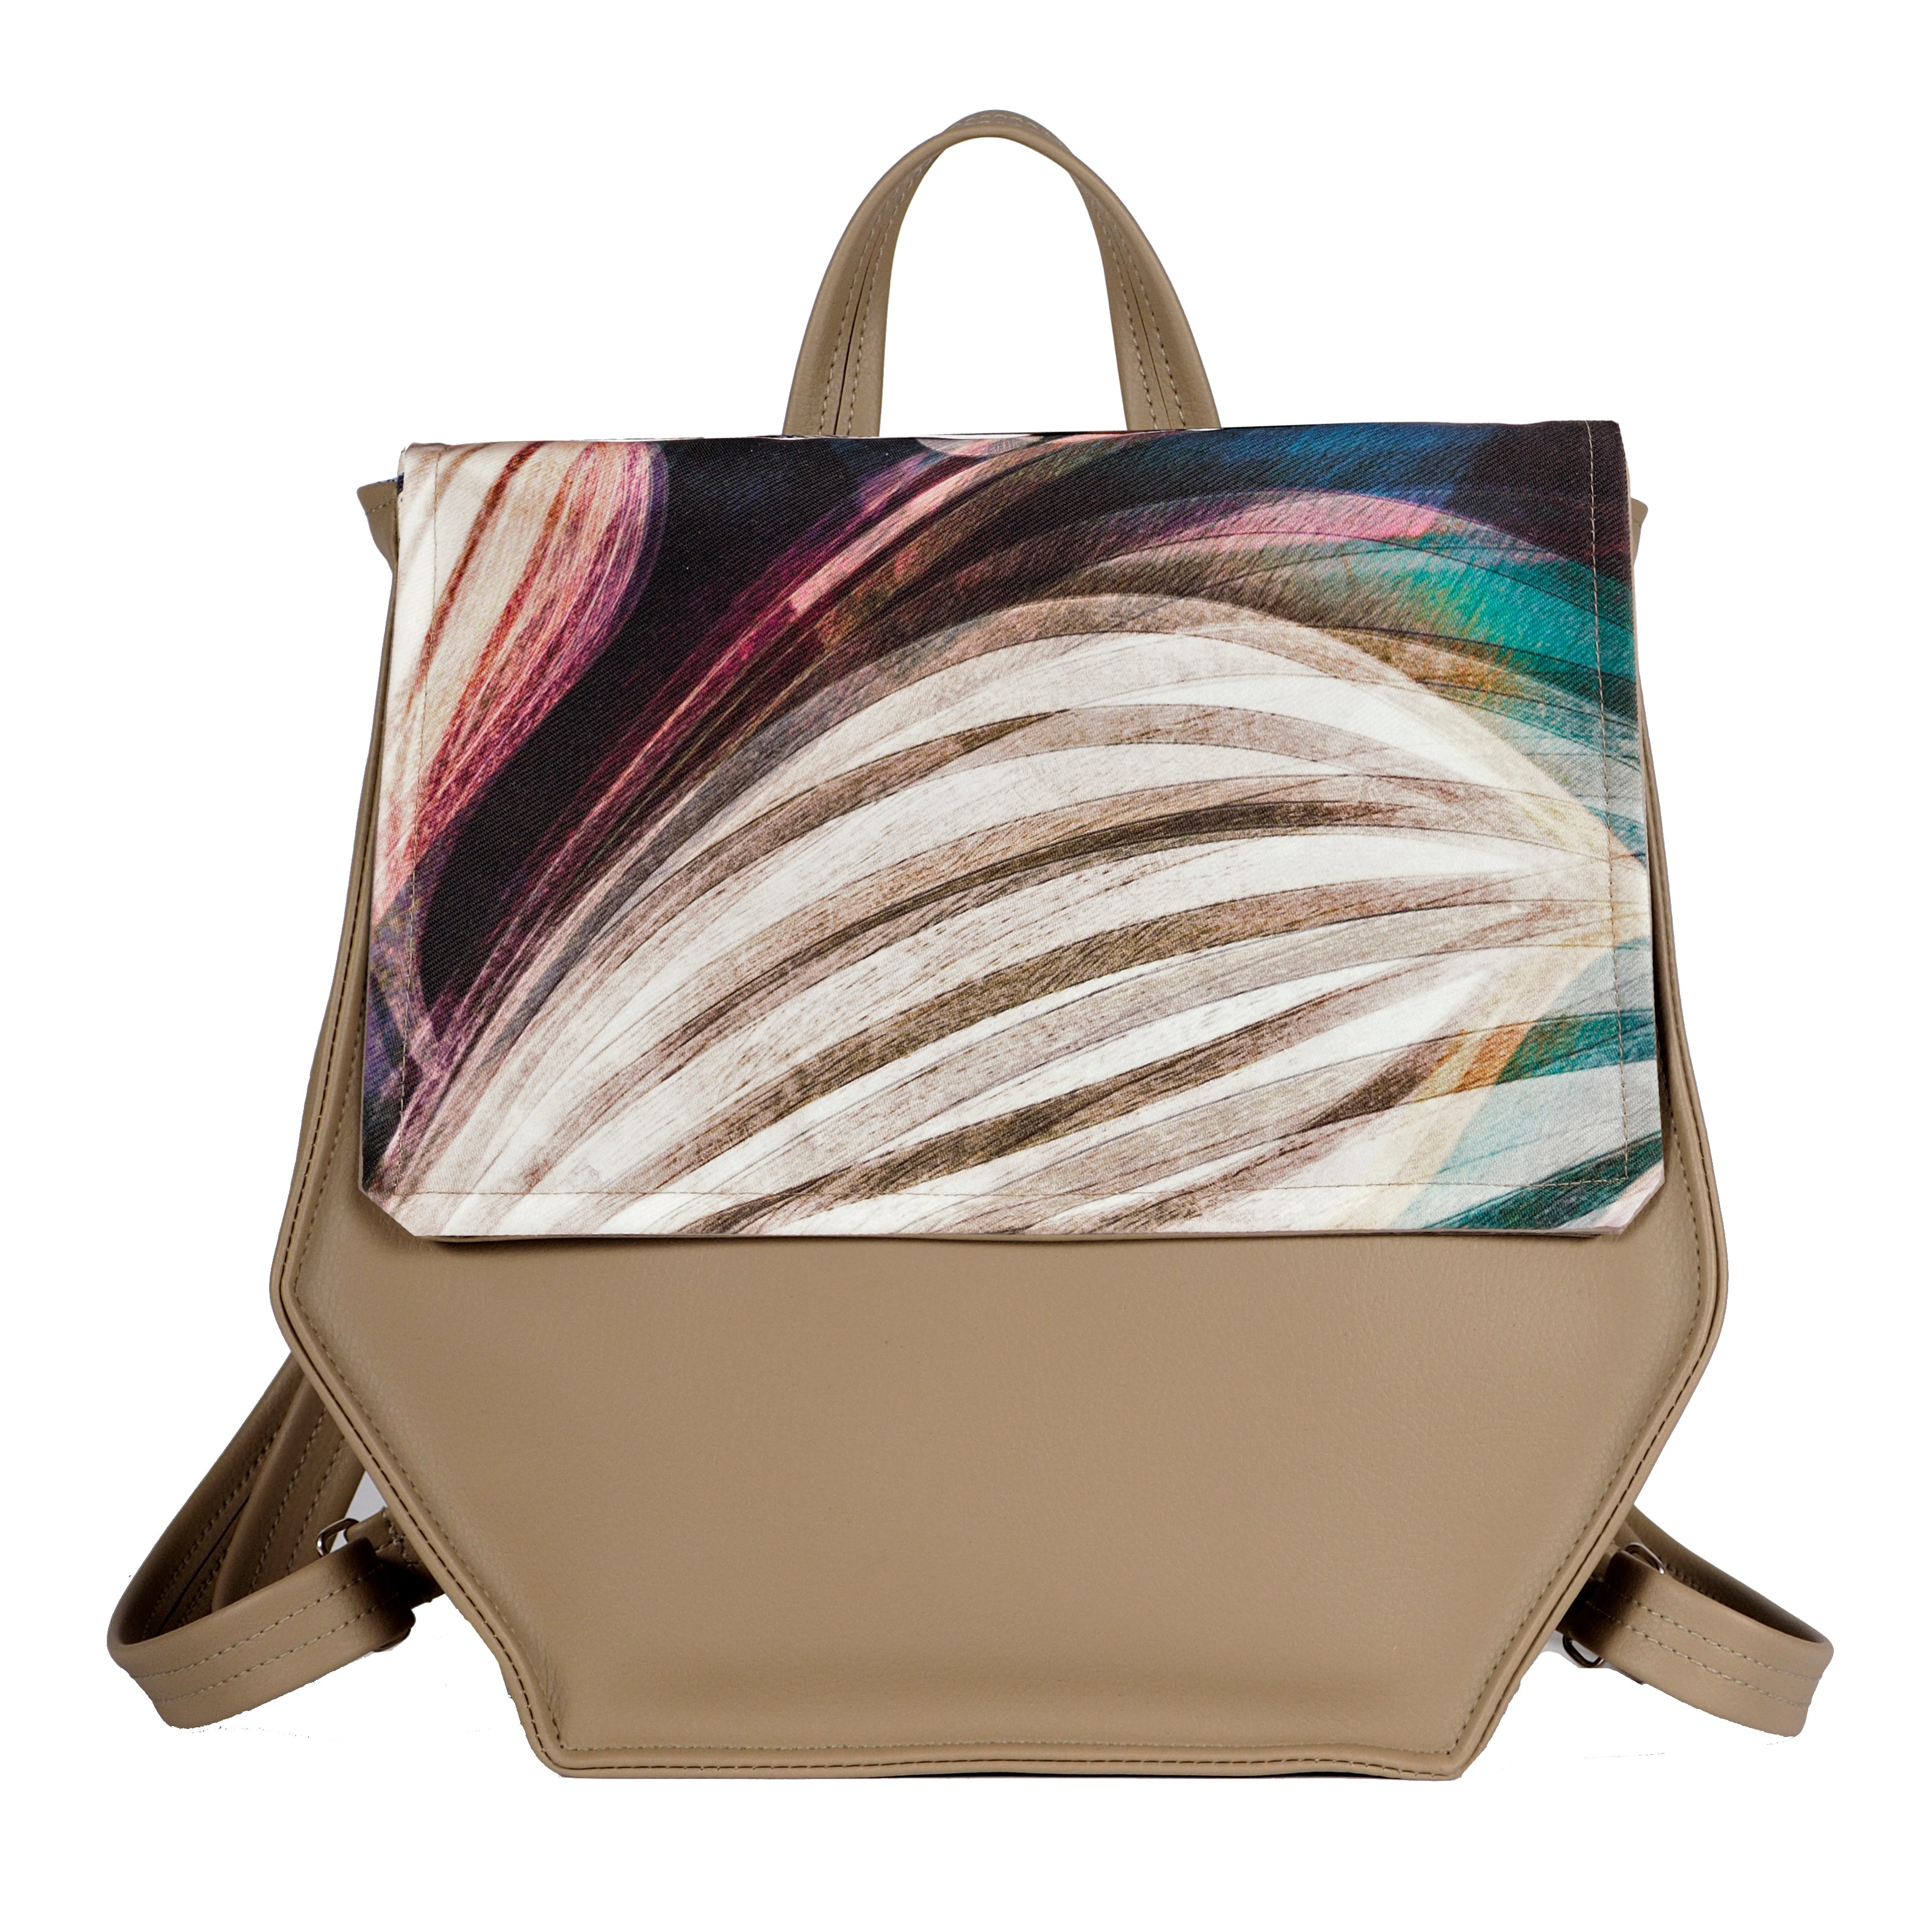 Bardo backpack honey cell - Spring - Premium backpack honey cell from BARDO ART WORKS - Just lvabstract, backpack, beige, black, floral, graphic, leaves, nature, vegan leather, woman65.00! Shop now at BARDO ART WORKS